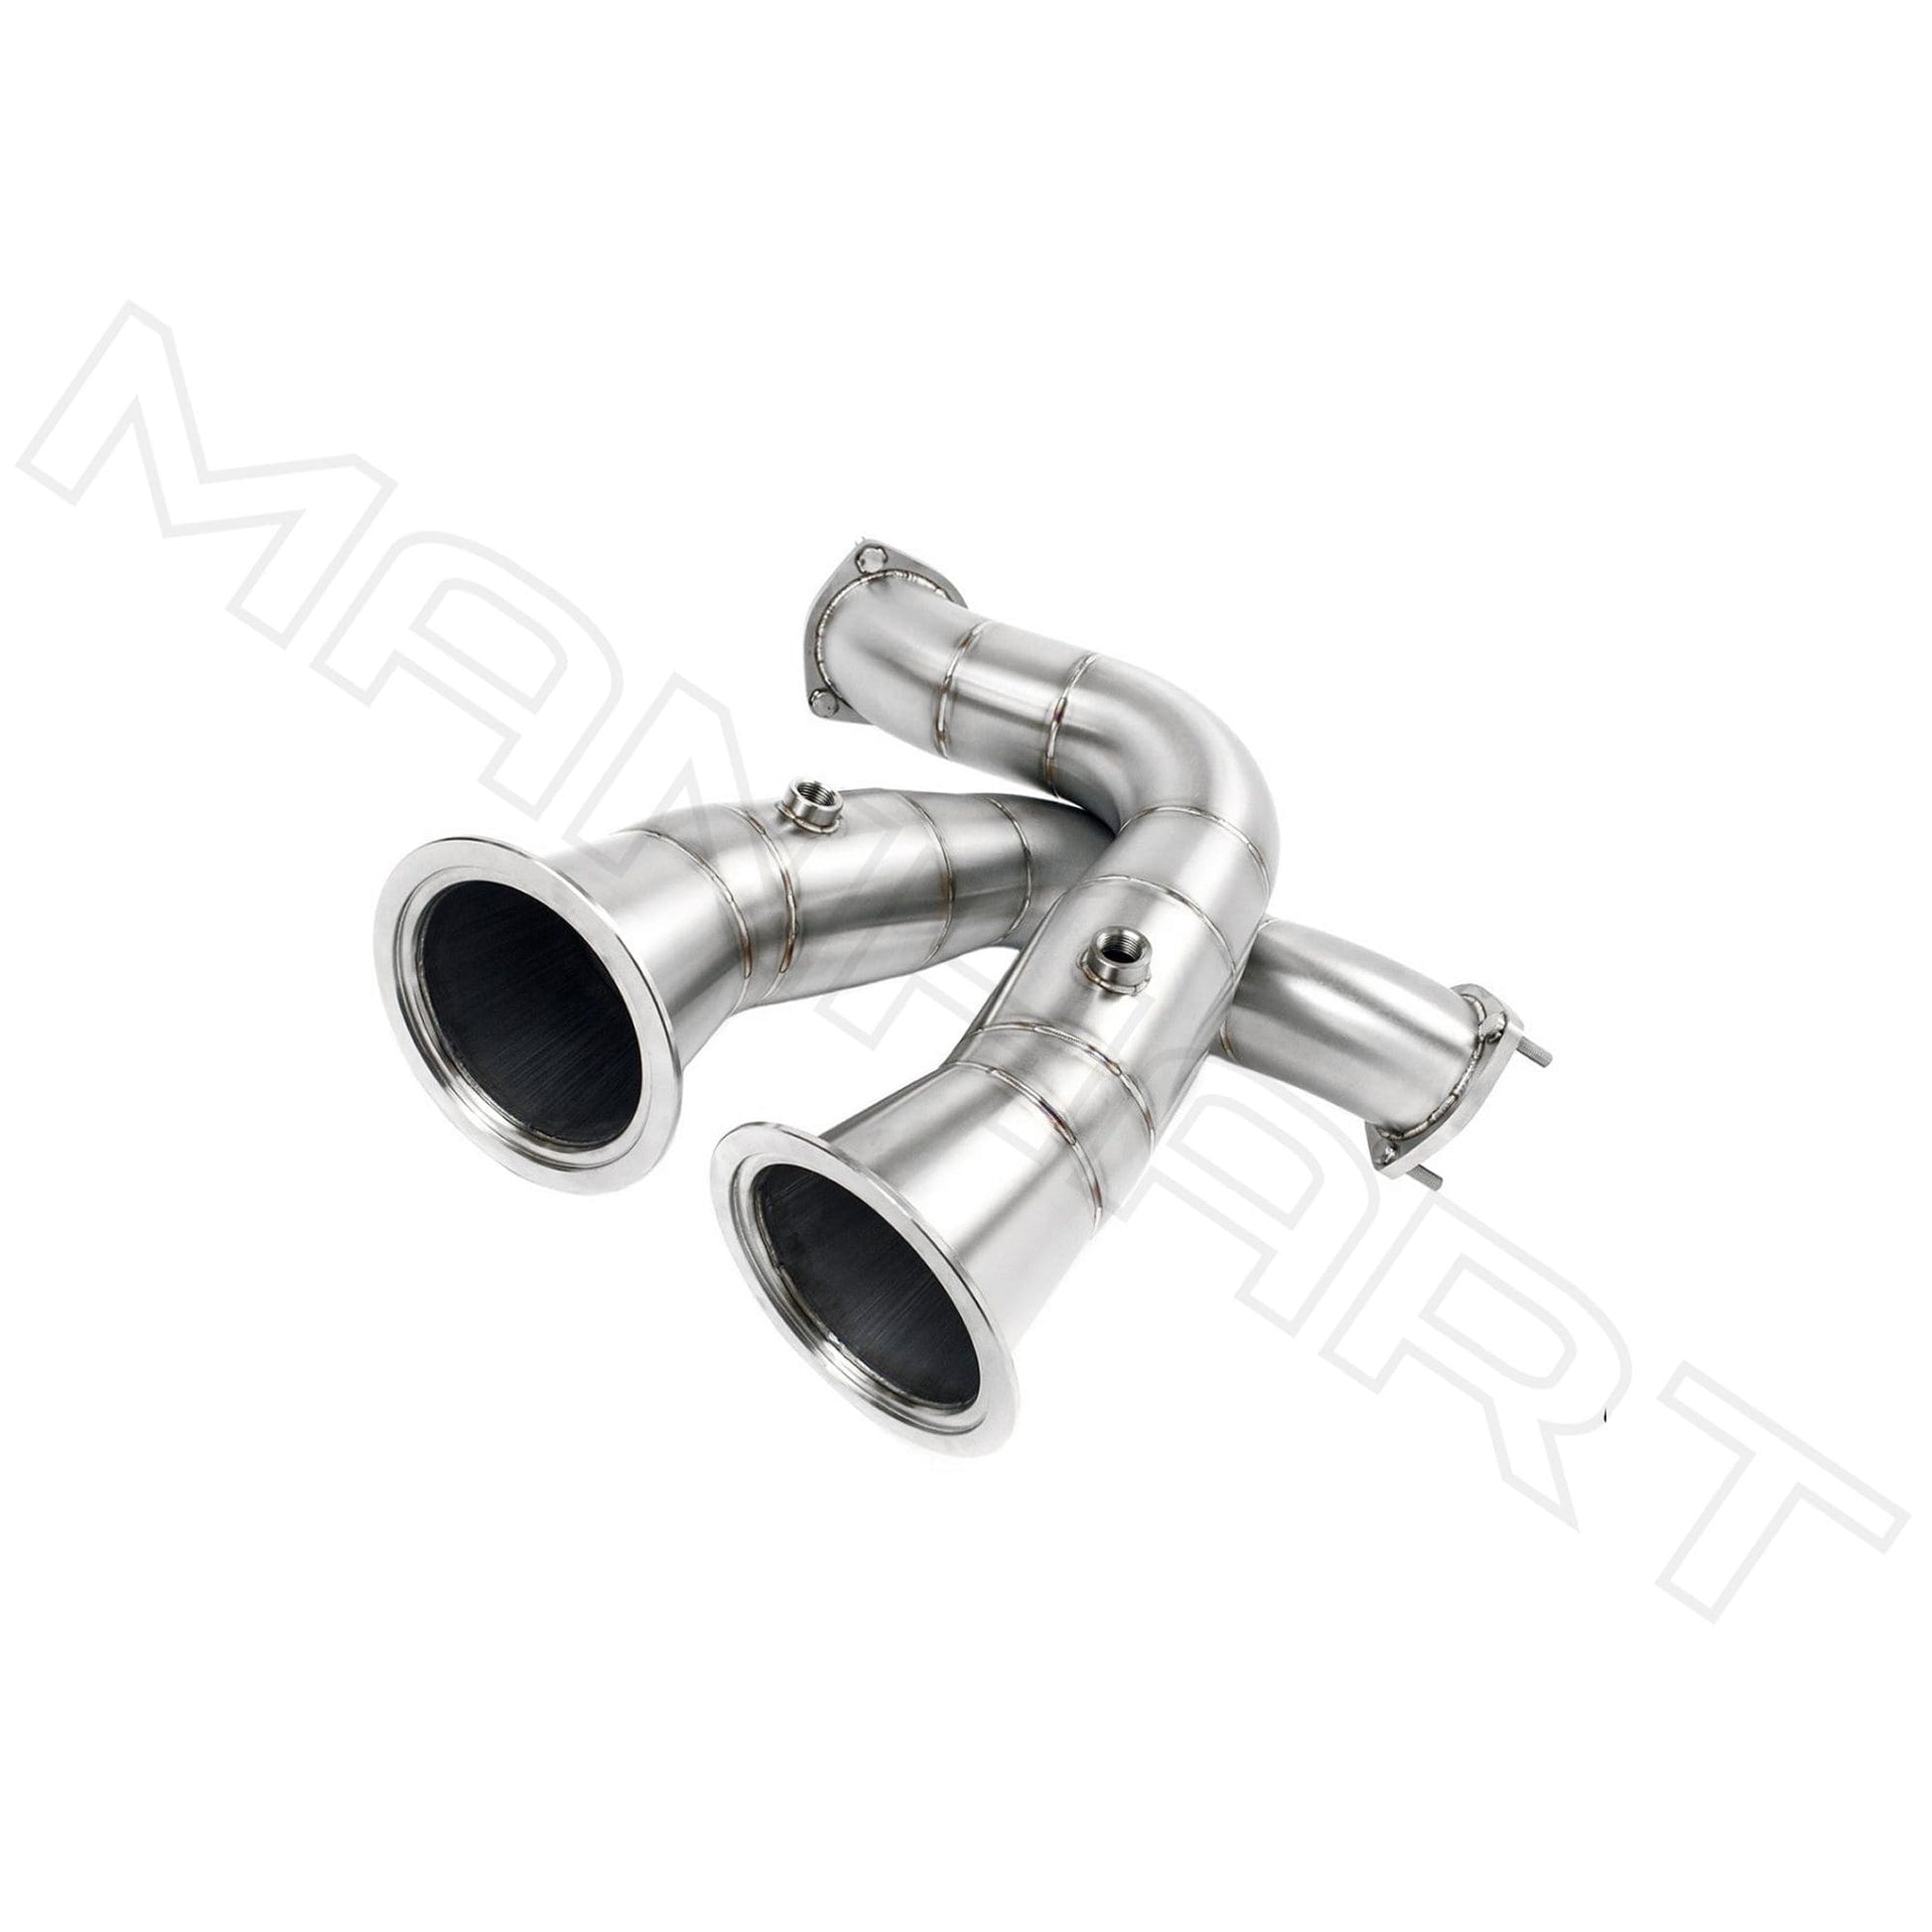 MANHART MH5LU3101 DOWNPIPES SPORT FOR LAMBORGHINI URUS WITH 300 CELLS HJS CATALYTIC CONVERTERS